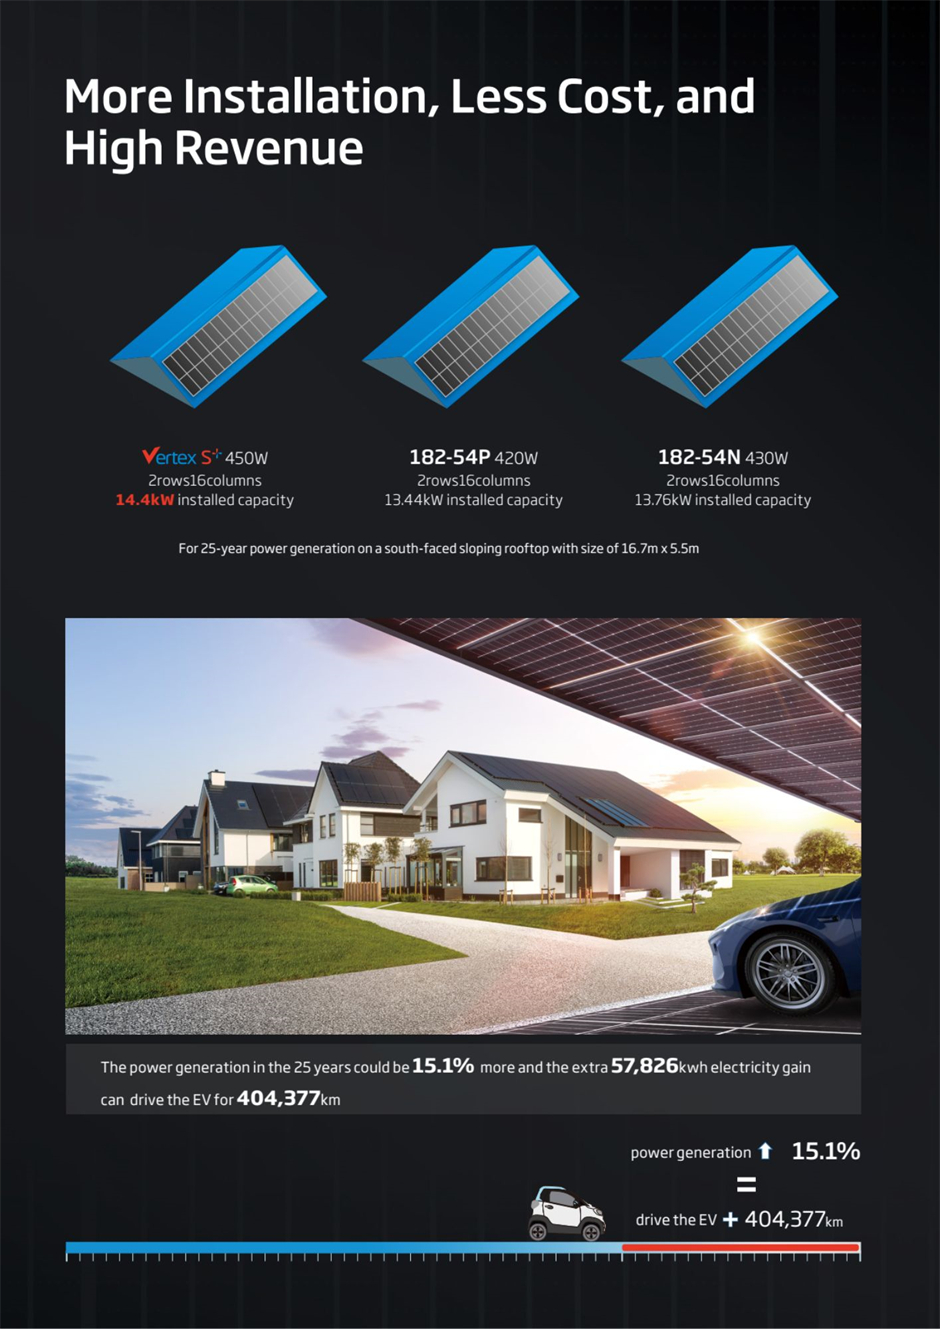 Vertex S+ Full Black delivers higher installation capacity at less cost and higher revenue on the same roof.
